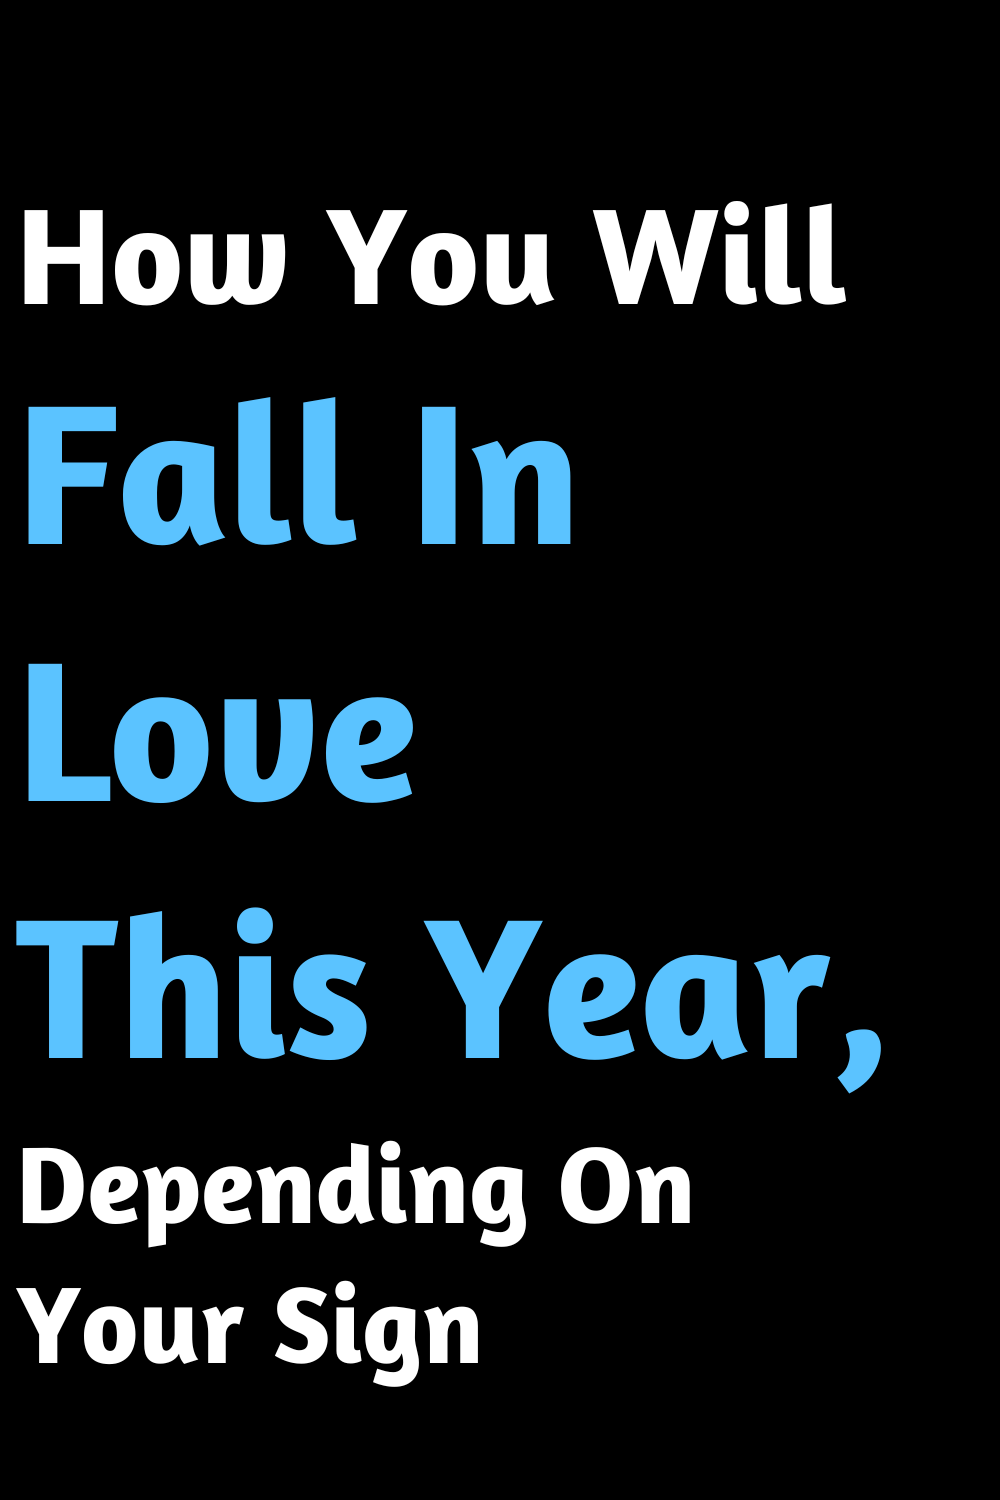 How You Will Fall In Love This Year, Depending On Your Sign